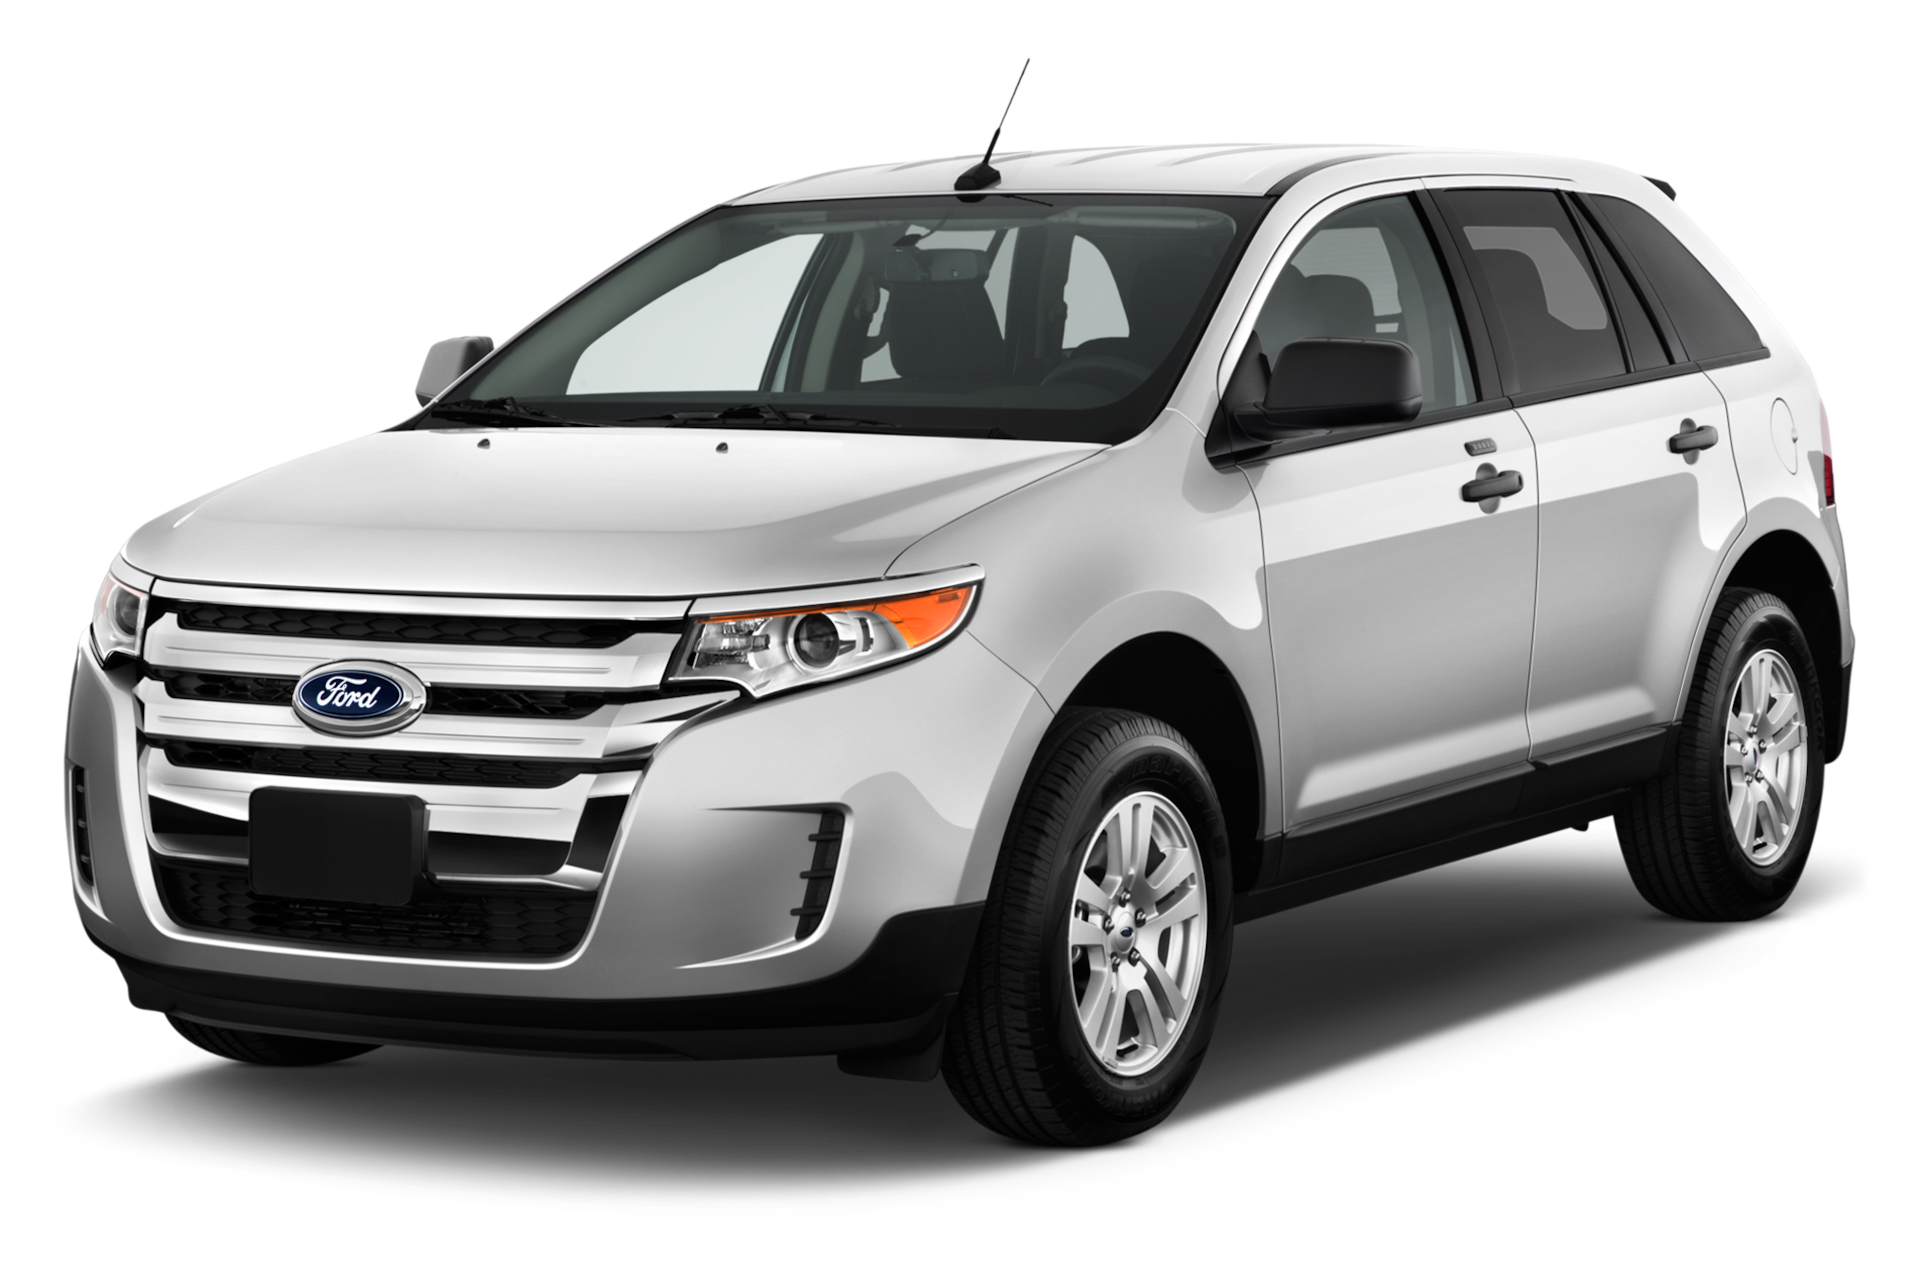 2012 Ford Edge Prices, Reviews, and Photos - MotorTrend